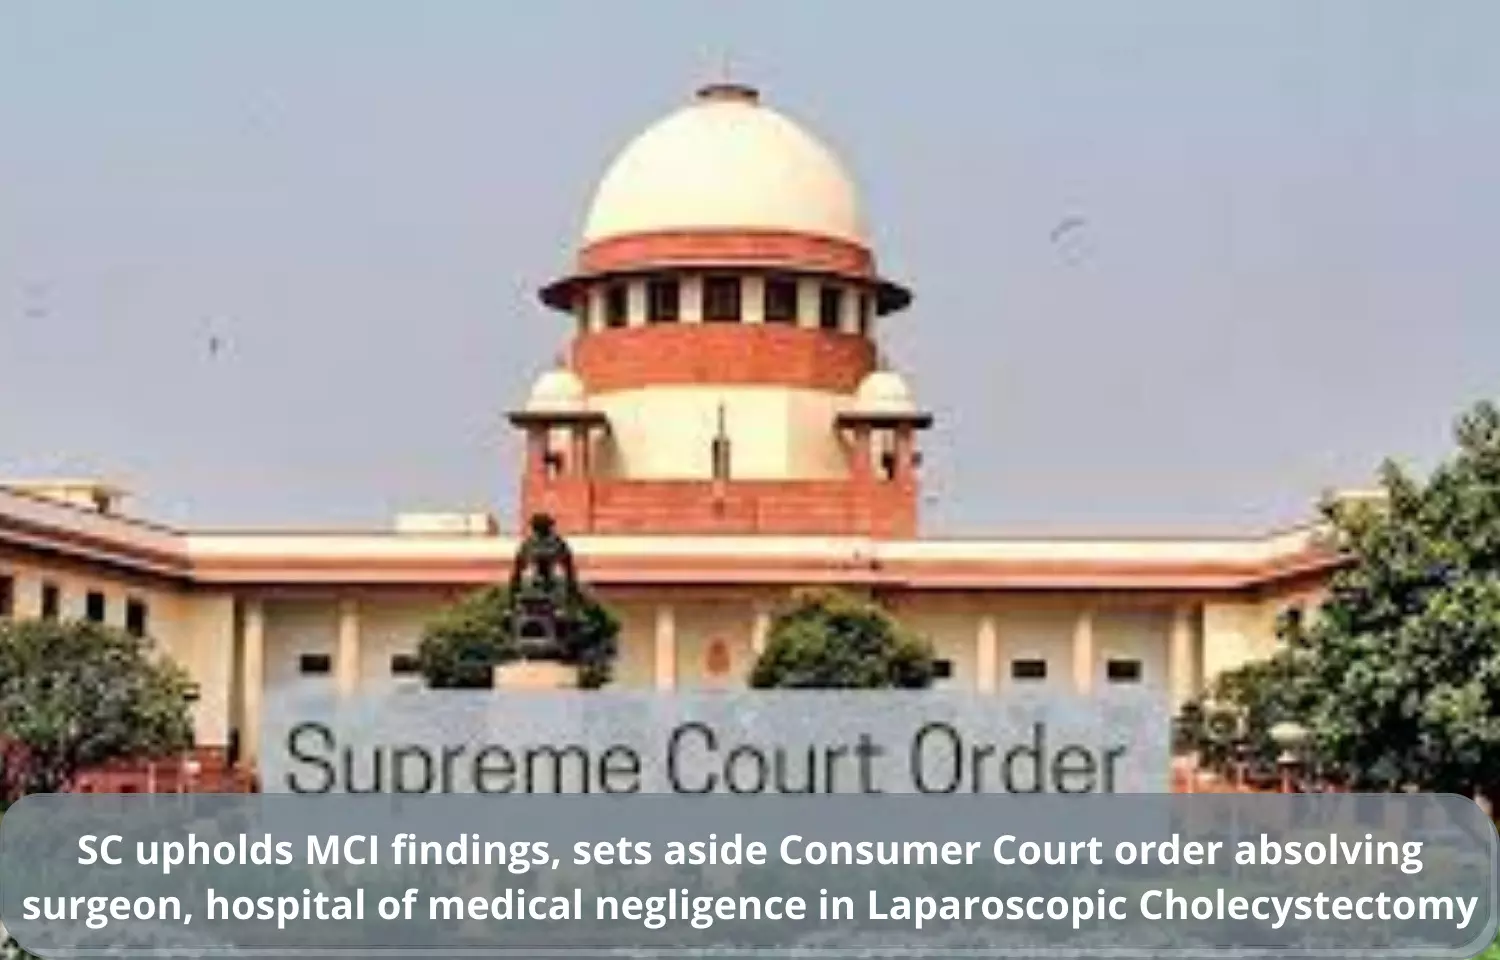 SC upholds MCI findings, sets aside Consumer Court order absolving surgeon, hospital of medical negligence in laparoscopic cholecystectomy